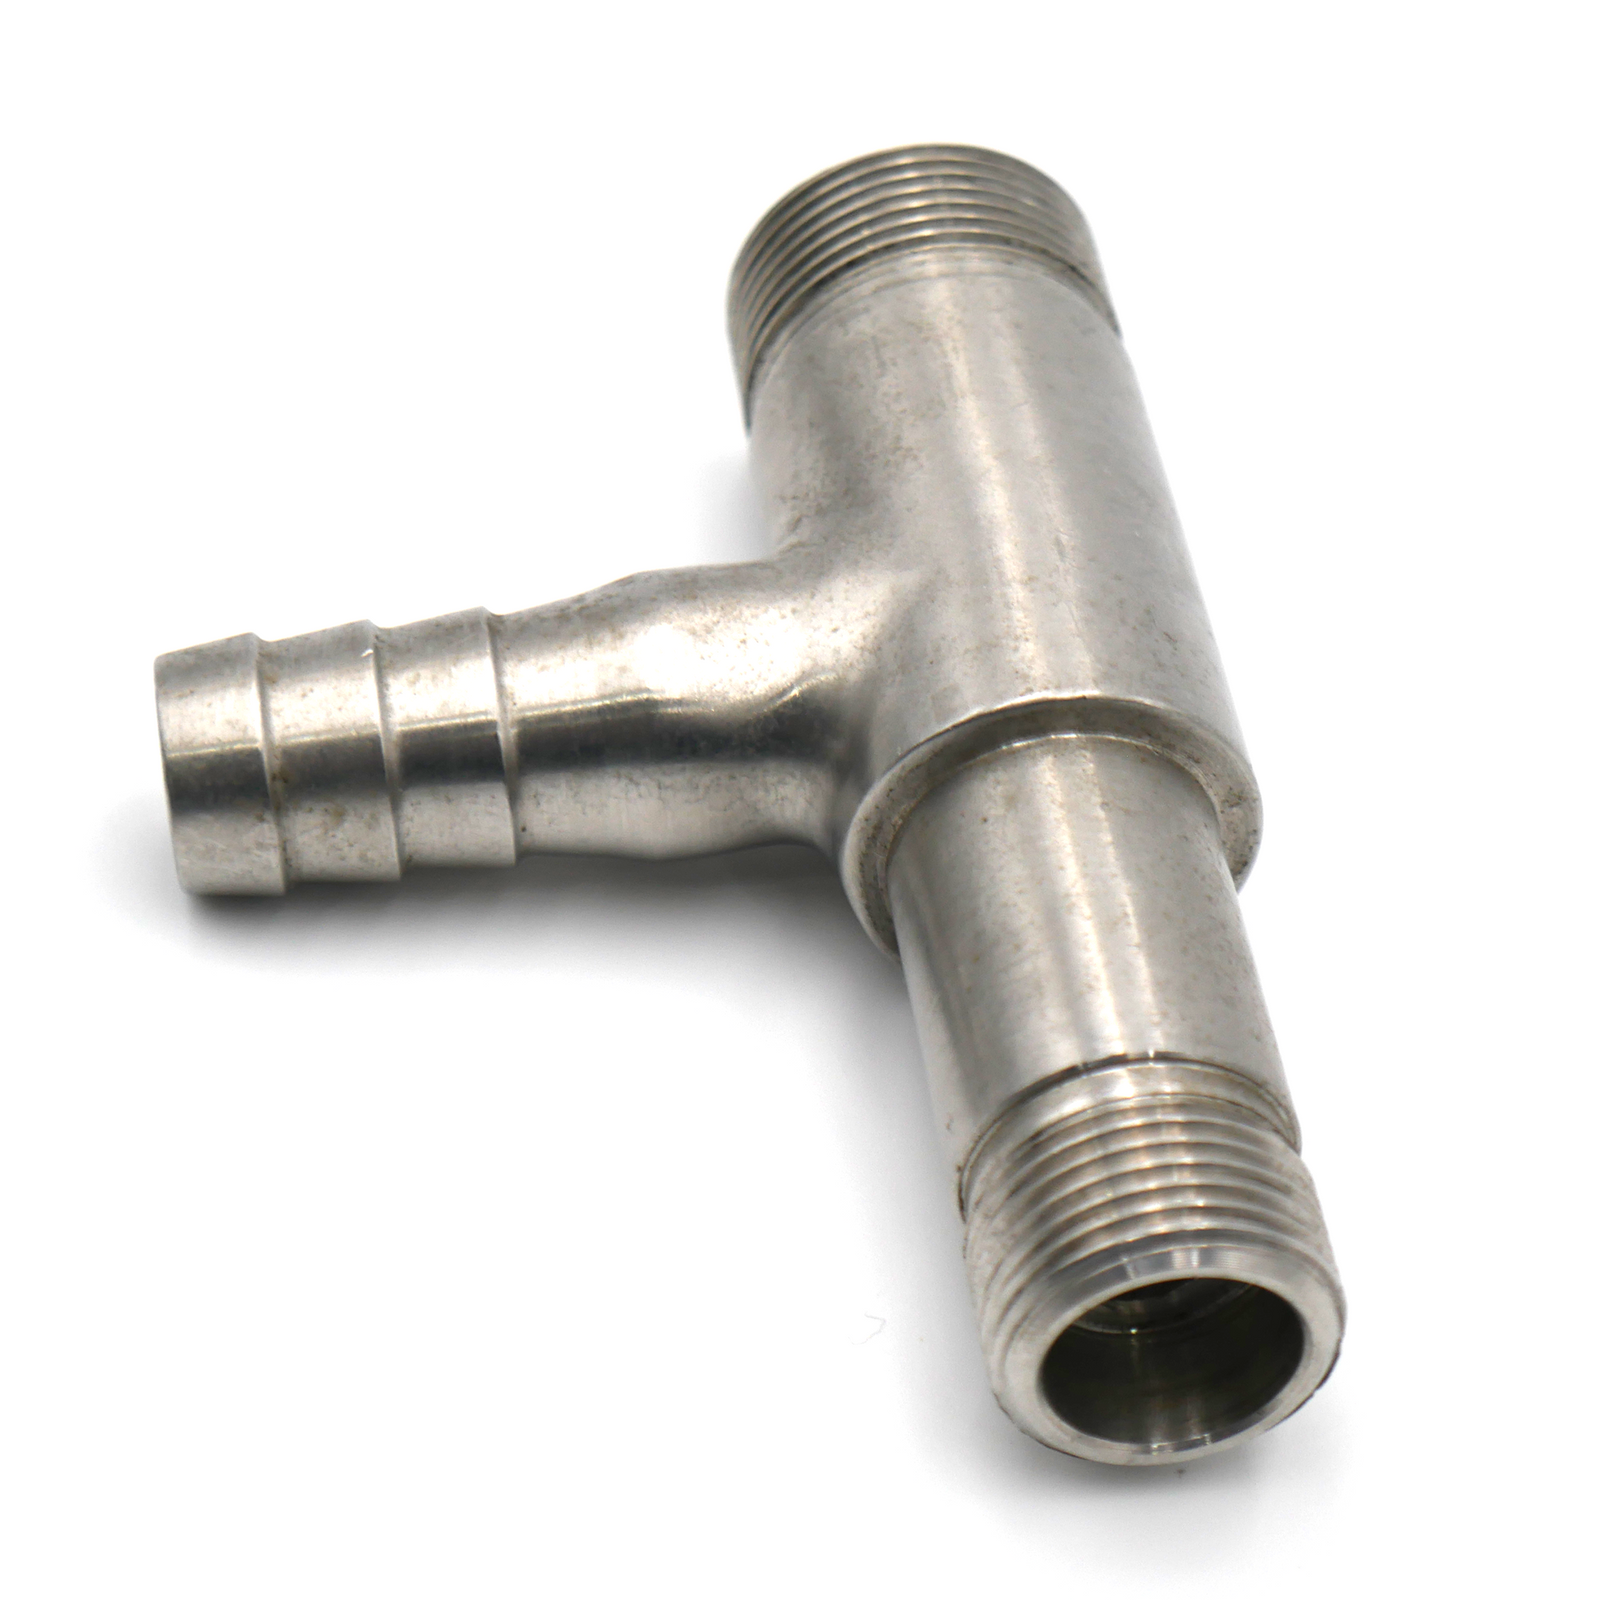 Type A nozzle body with barber hose connection